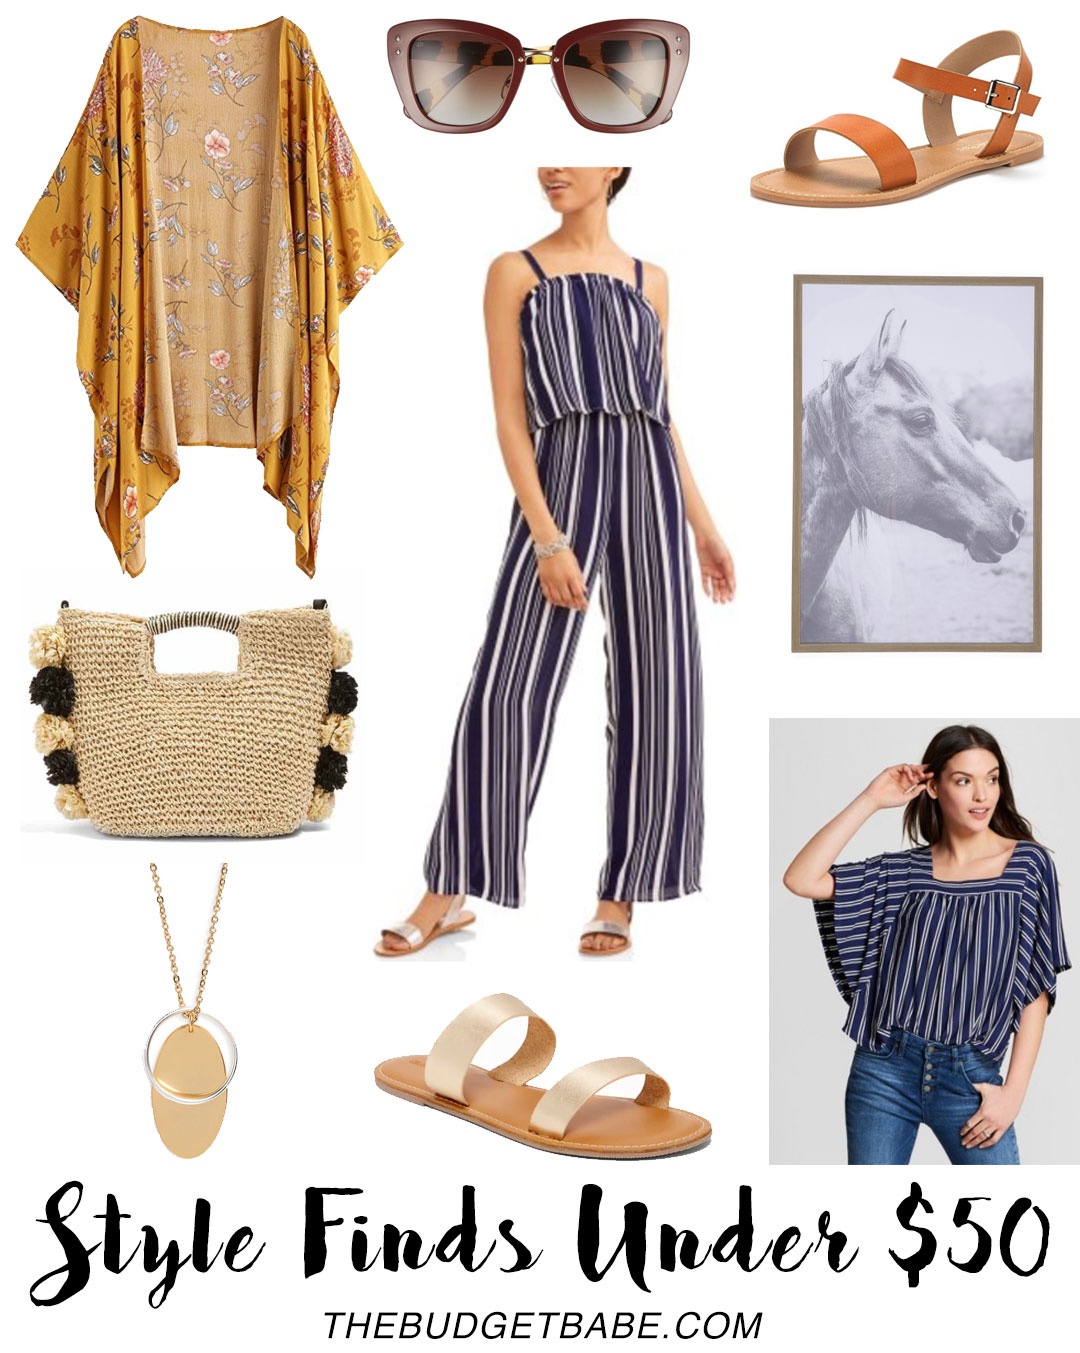 Style finds under $50